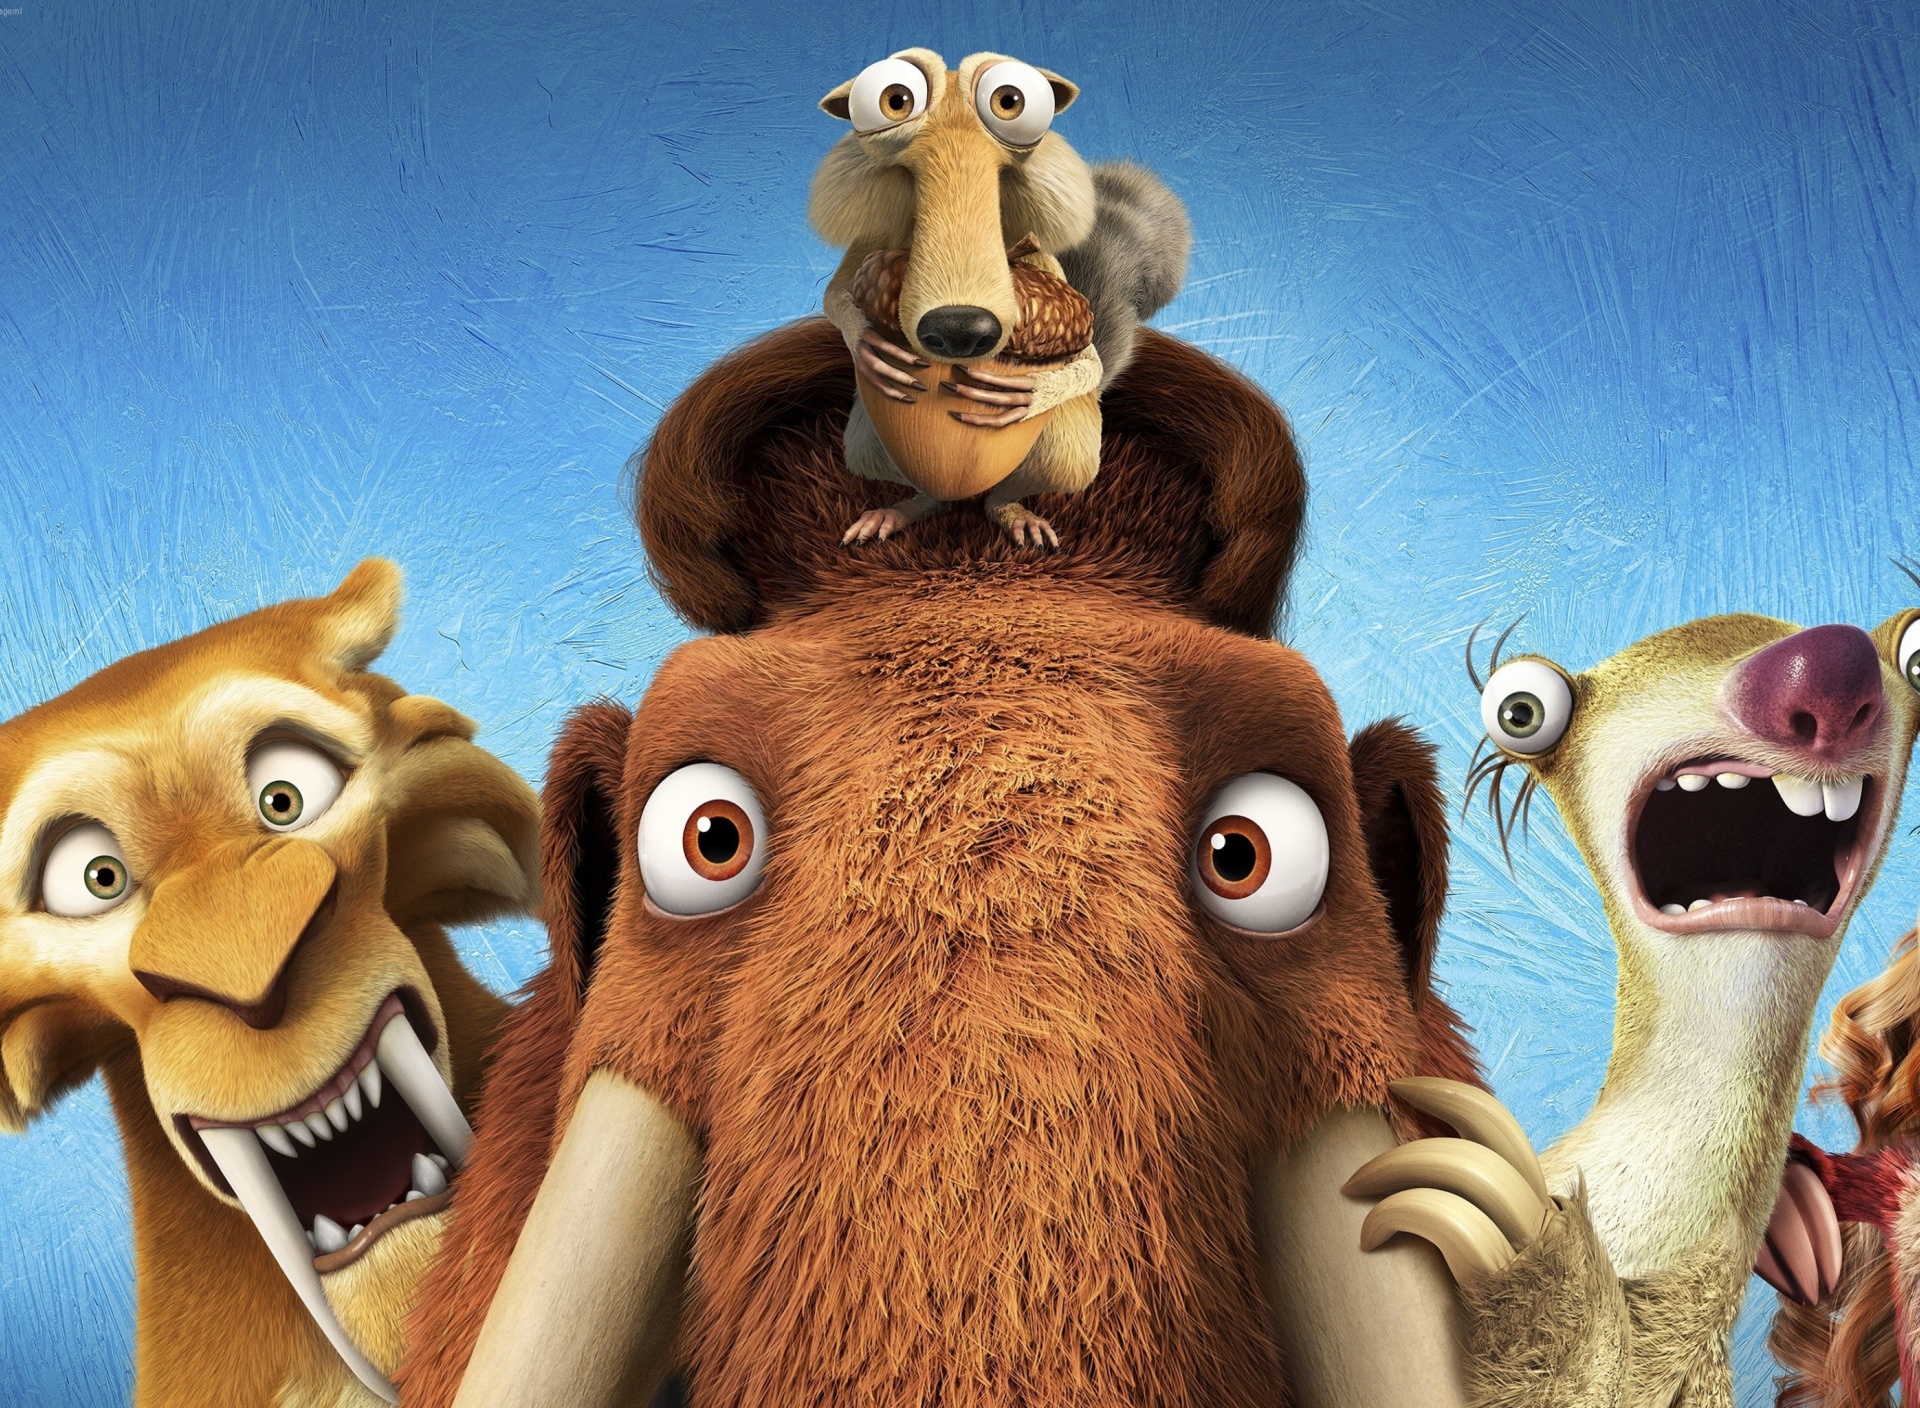 Ice Age 5 Collision Course with Diego, Manny, Scrat, Sid, Mammoths screenshot #1 1920x1408